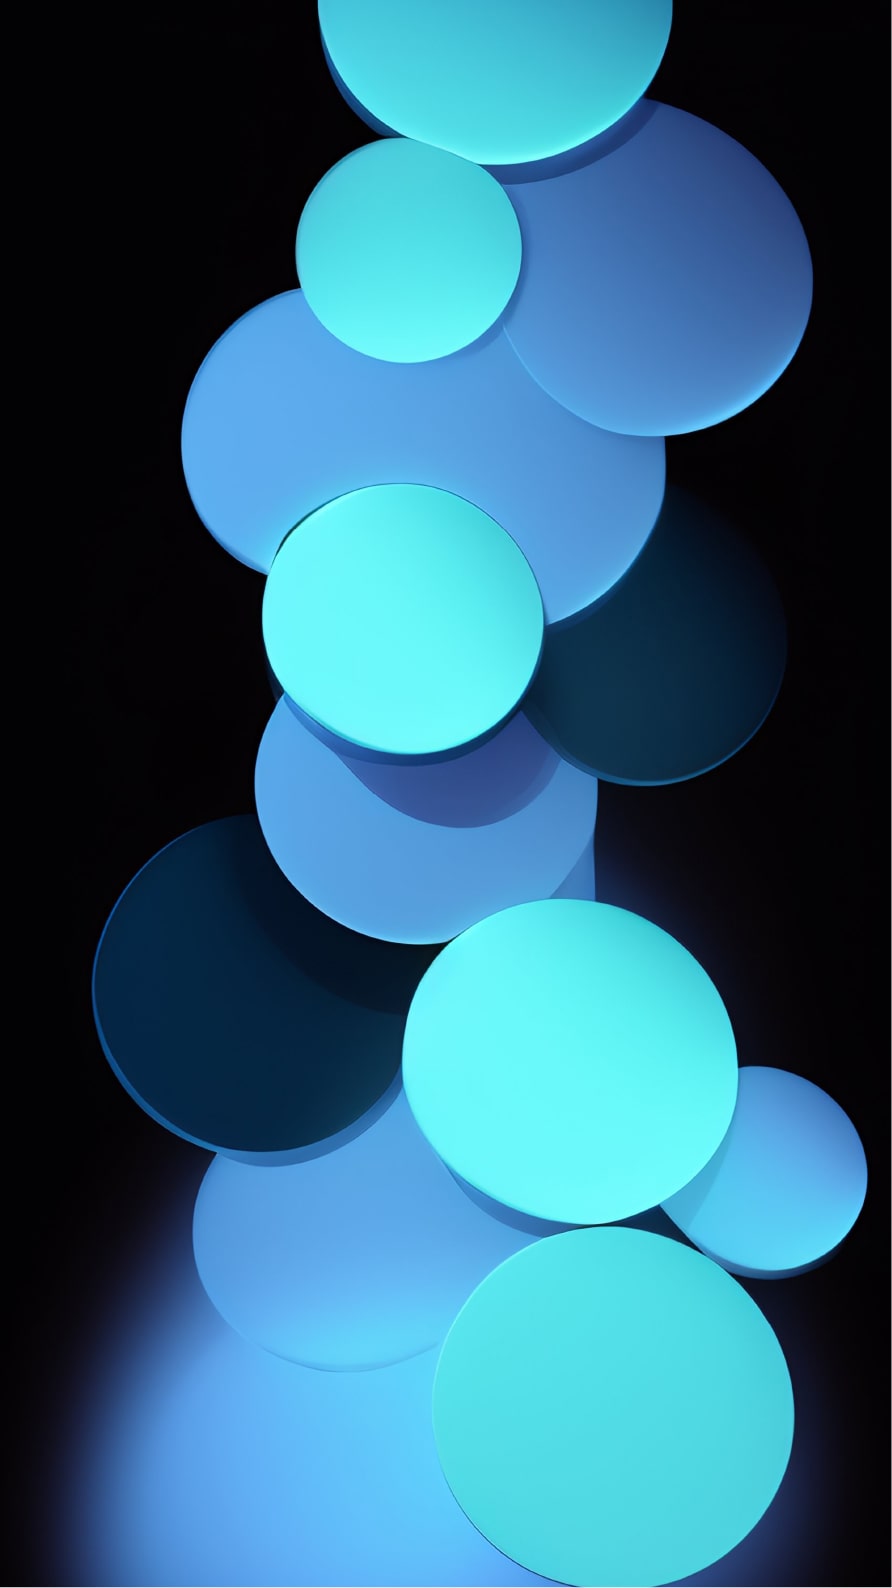 Blue iPhone wallpapers